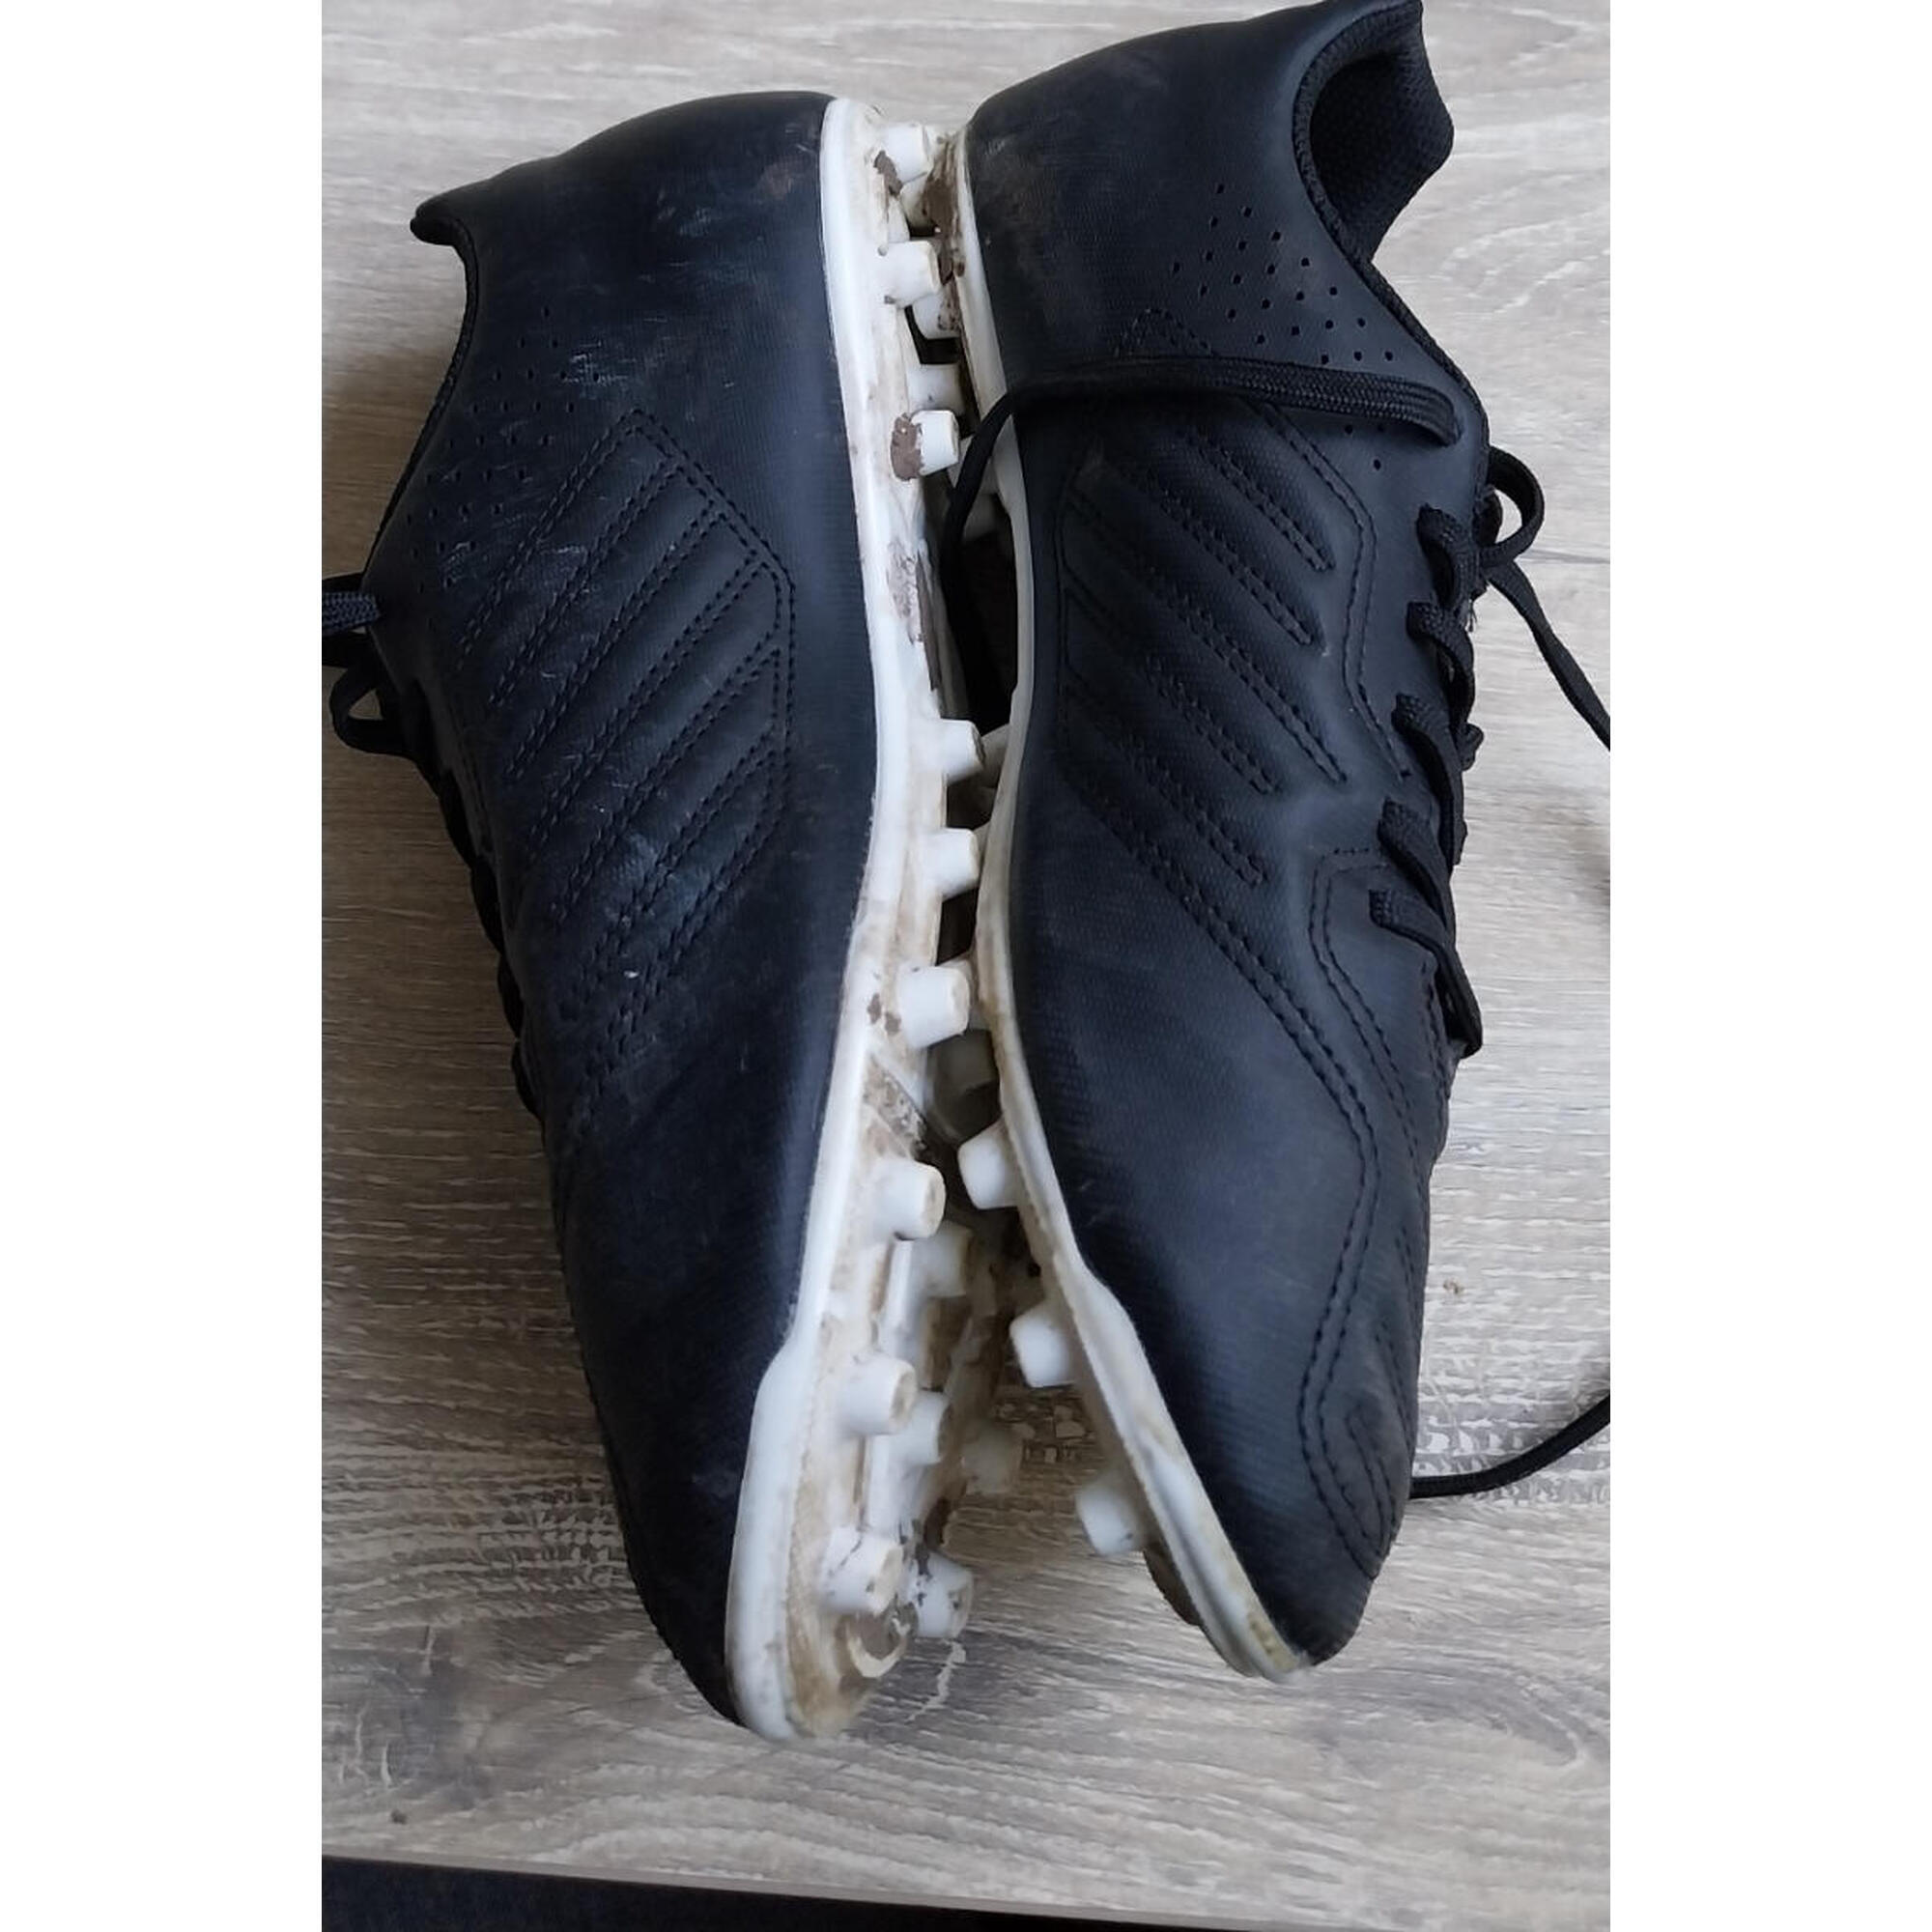 C2C - Chaussures de football taille 38